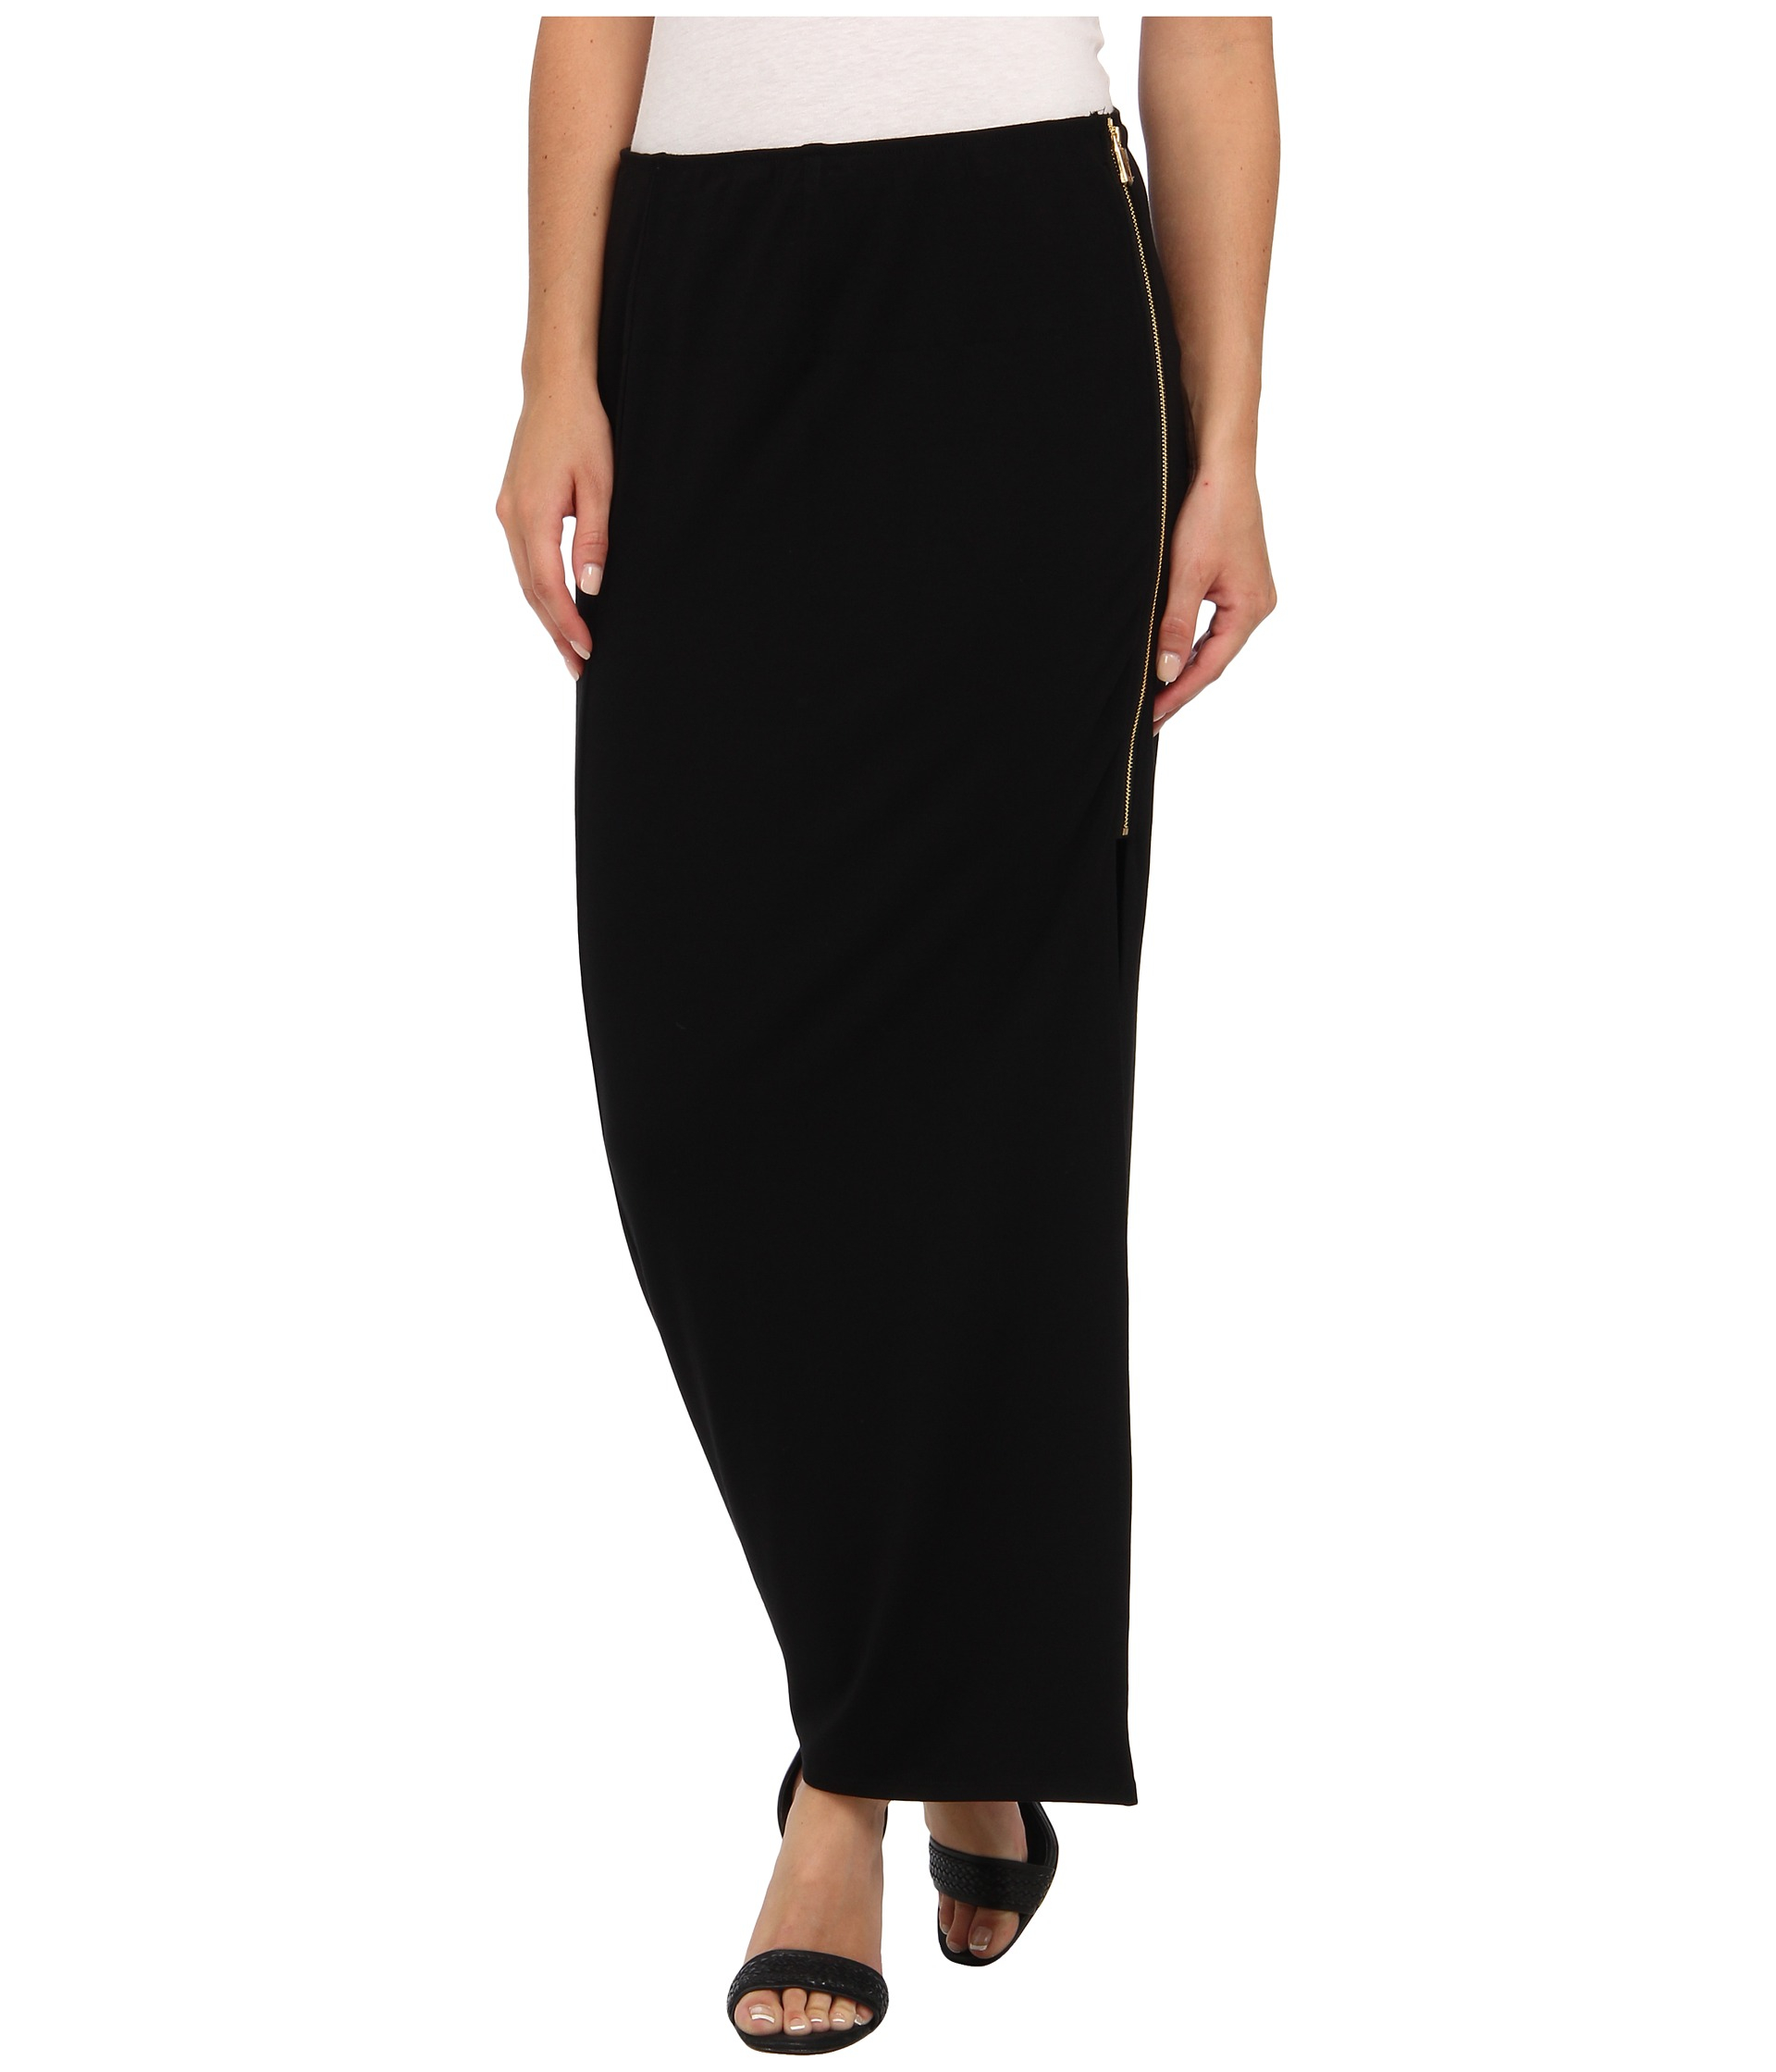 Vince camuto Side Zip Maxi Skirt in Black (Rich Black) | Lyst